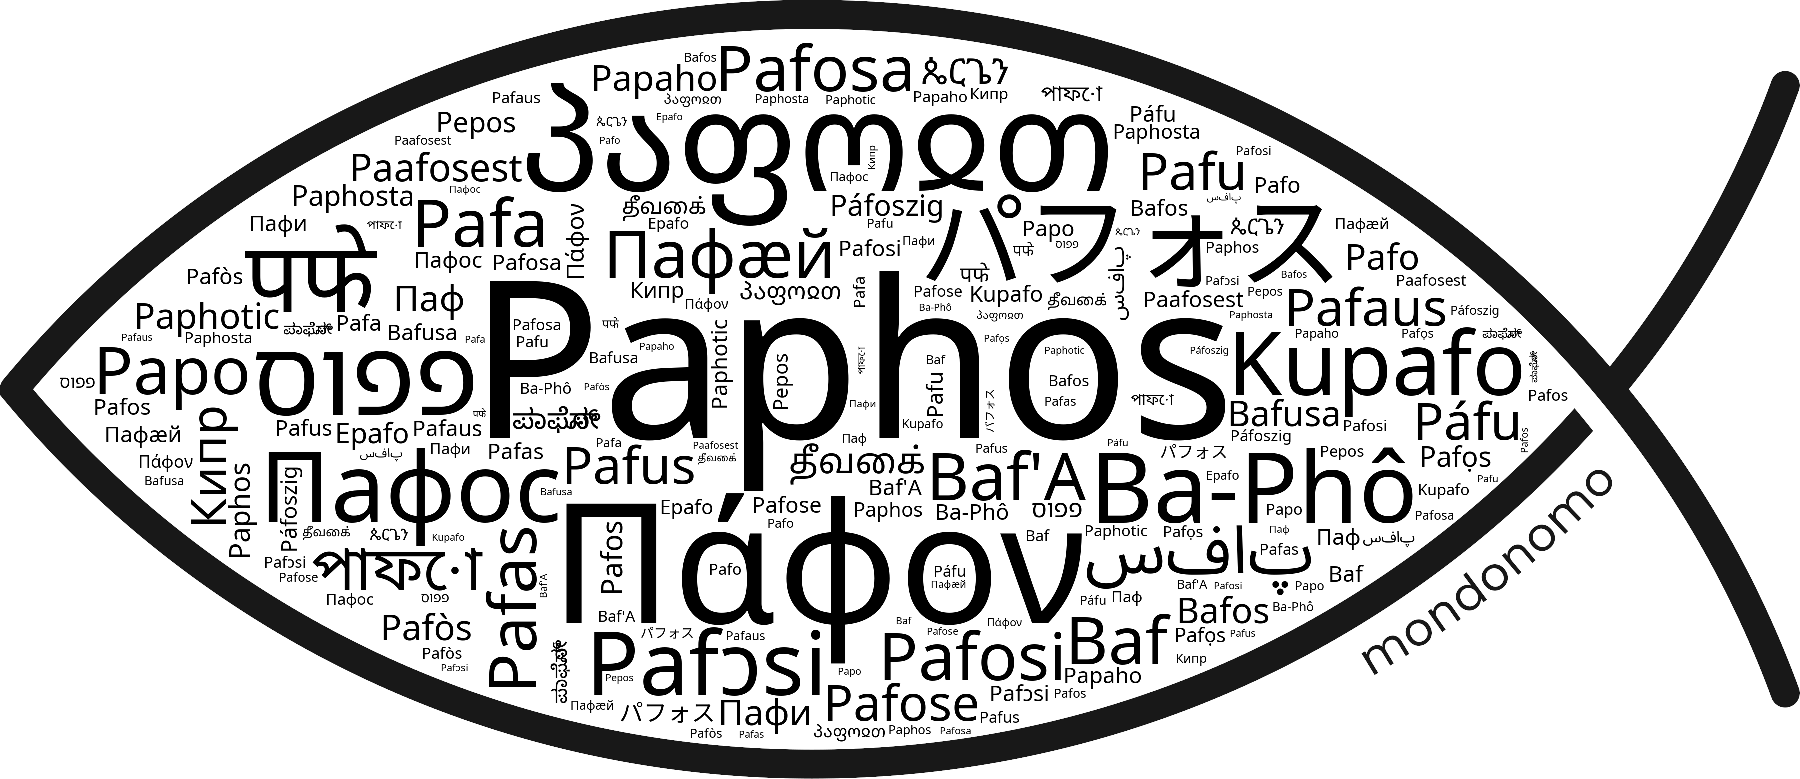 Name Paphos in the world's Bibles